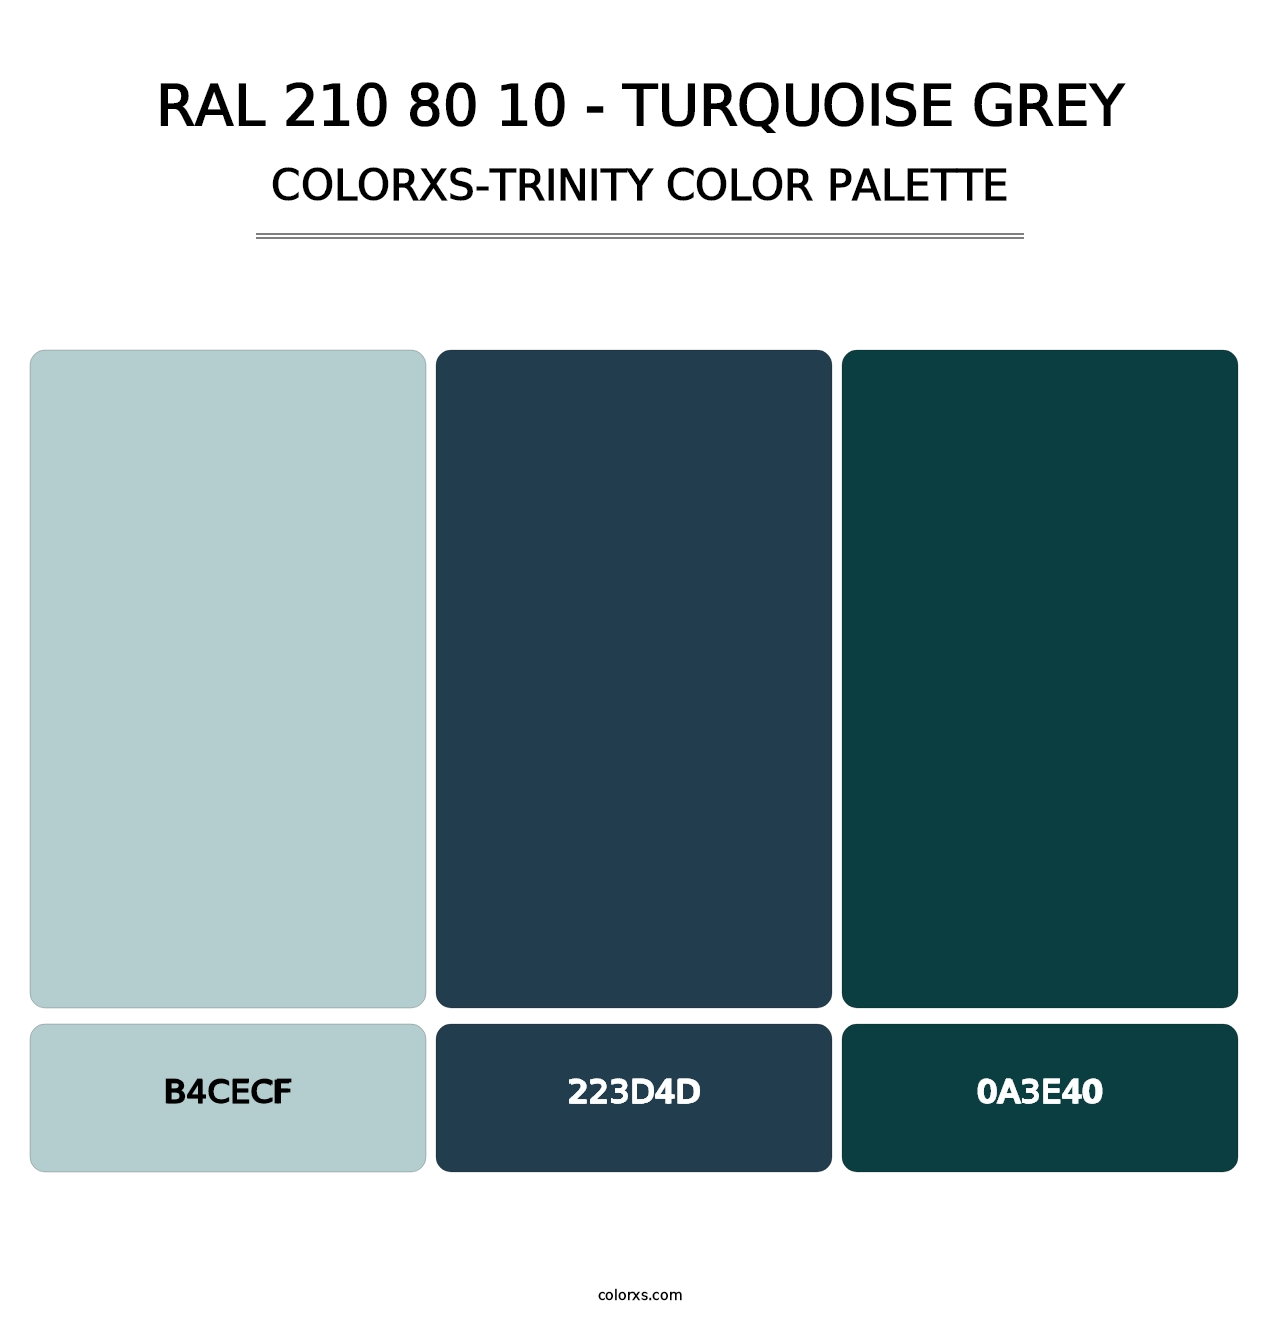 RAL 210 80 10 - Turquoise Grey - Colorxs Trinity Palette